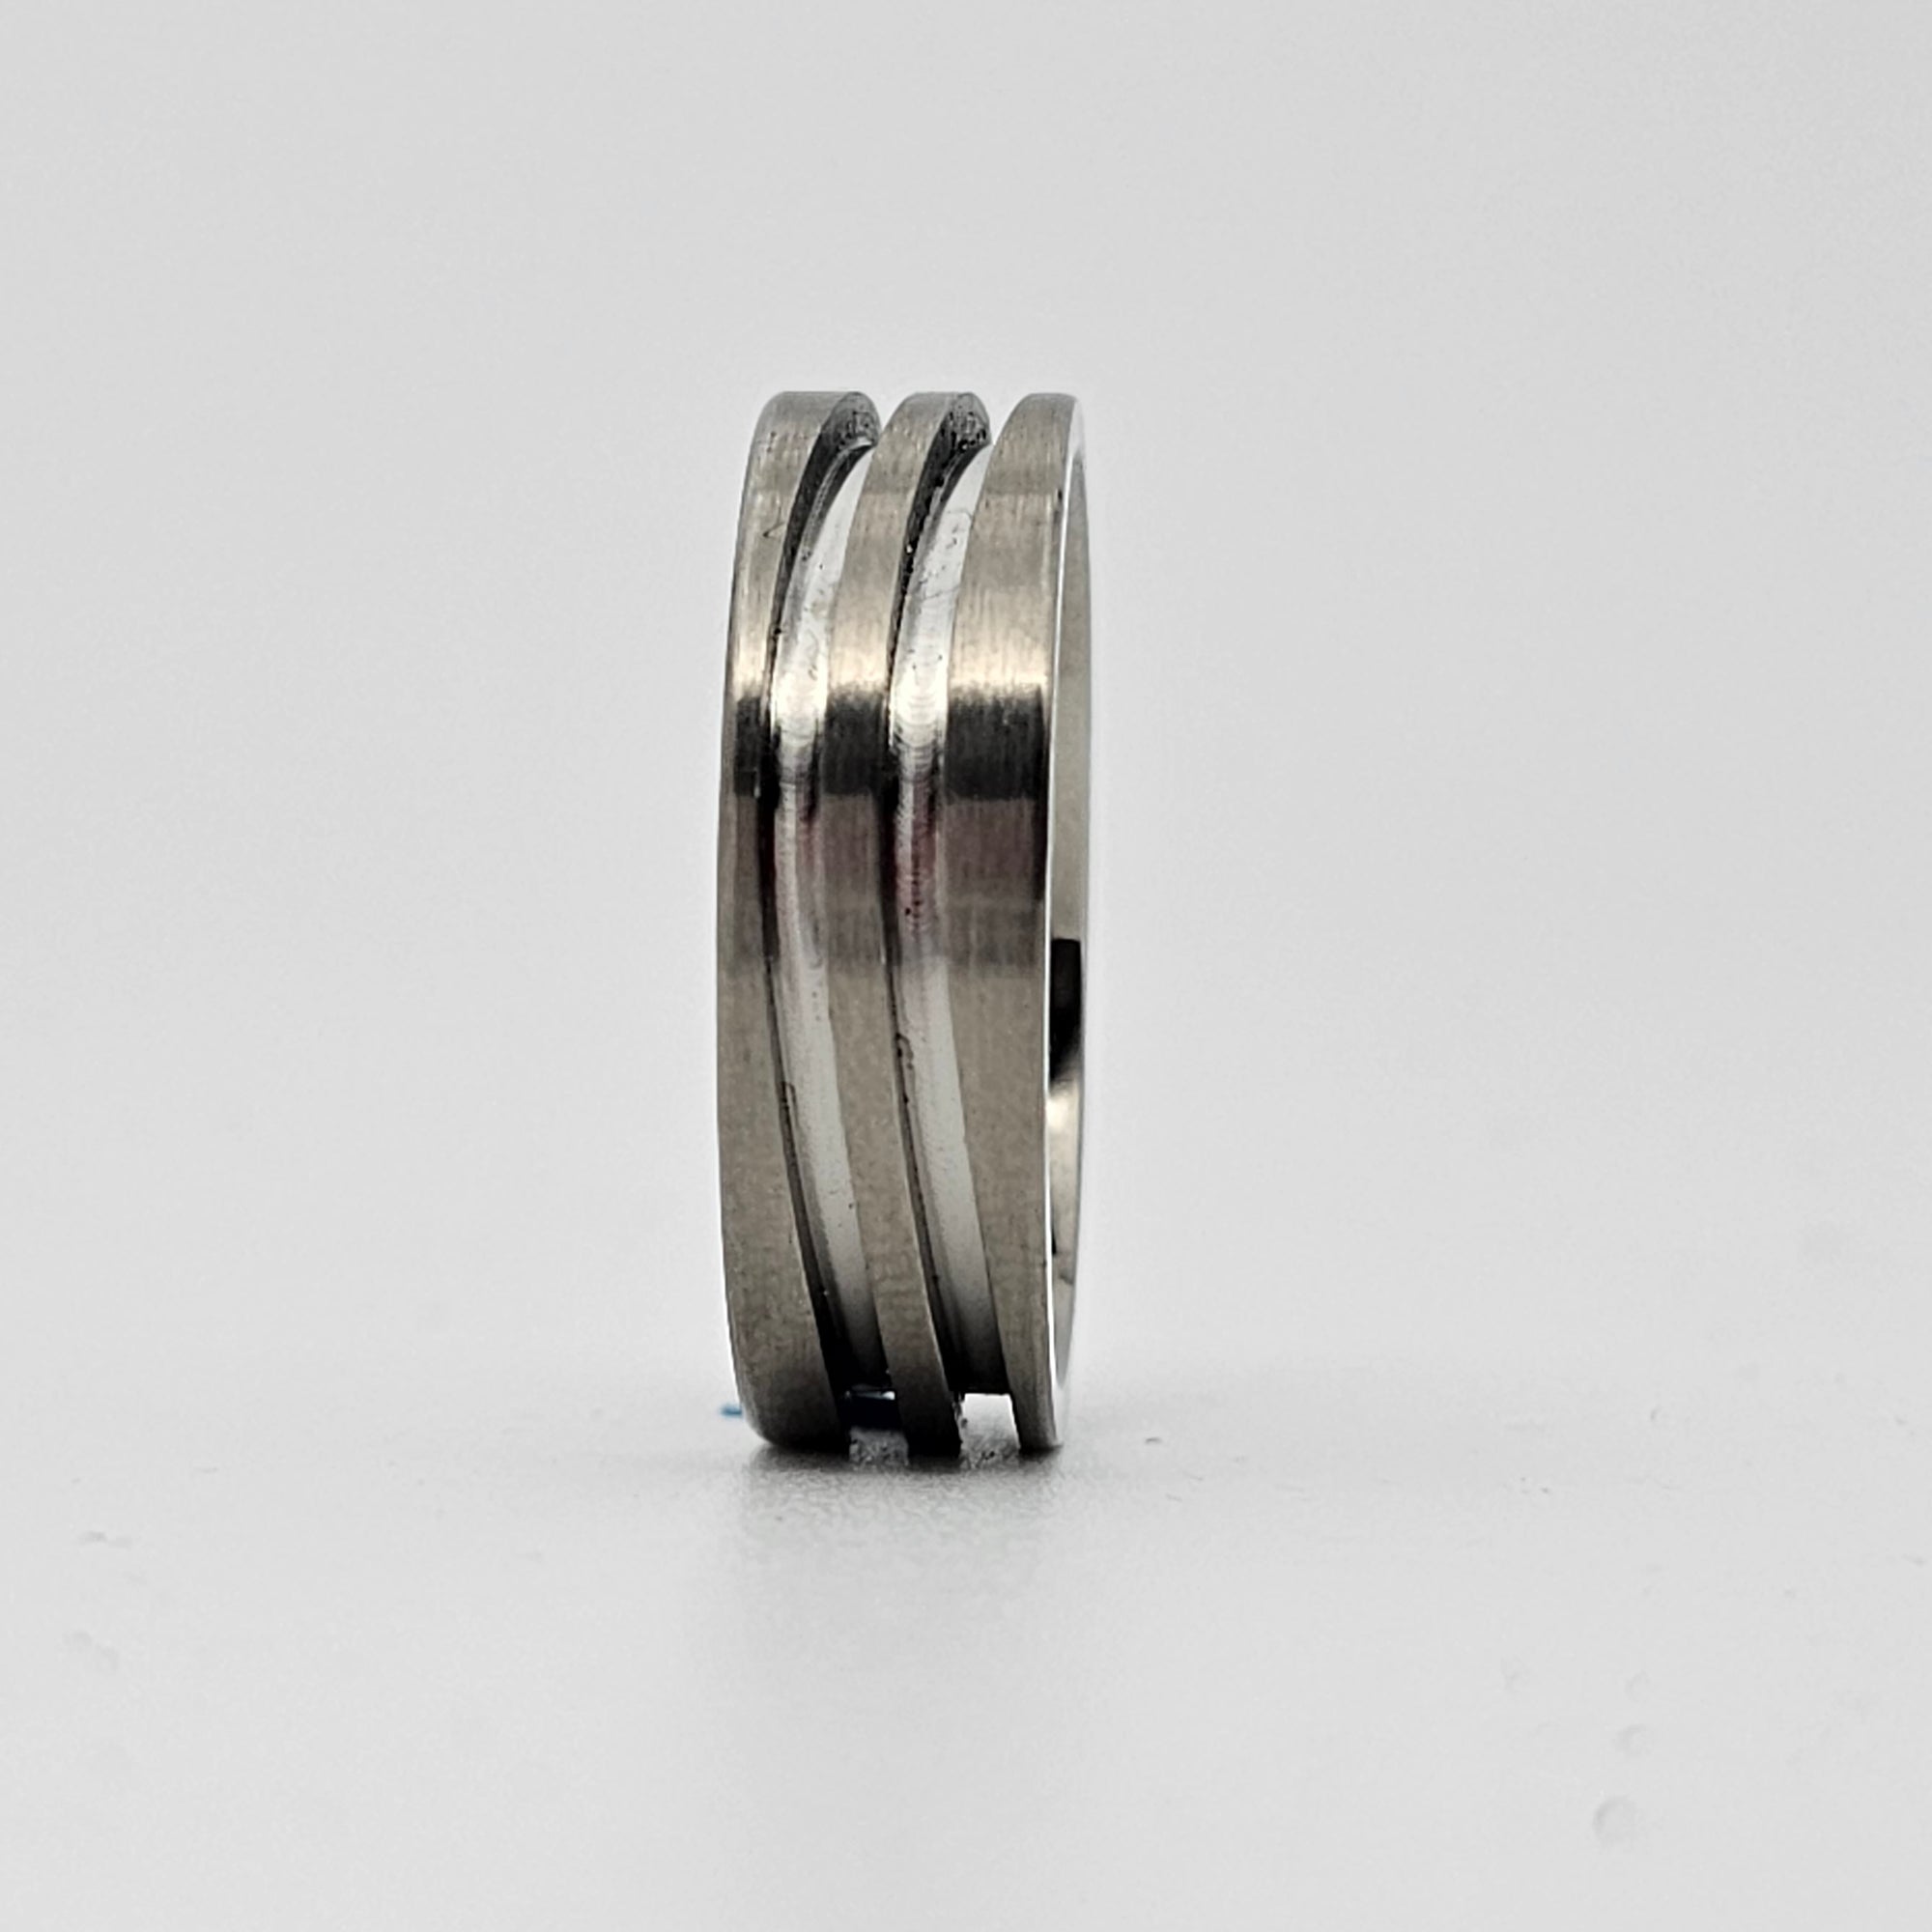  0.47 x 2.24 x 0.04 Inch Aluminum Ring Blanks for Metal